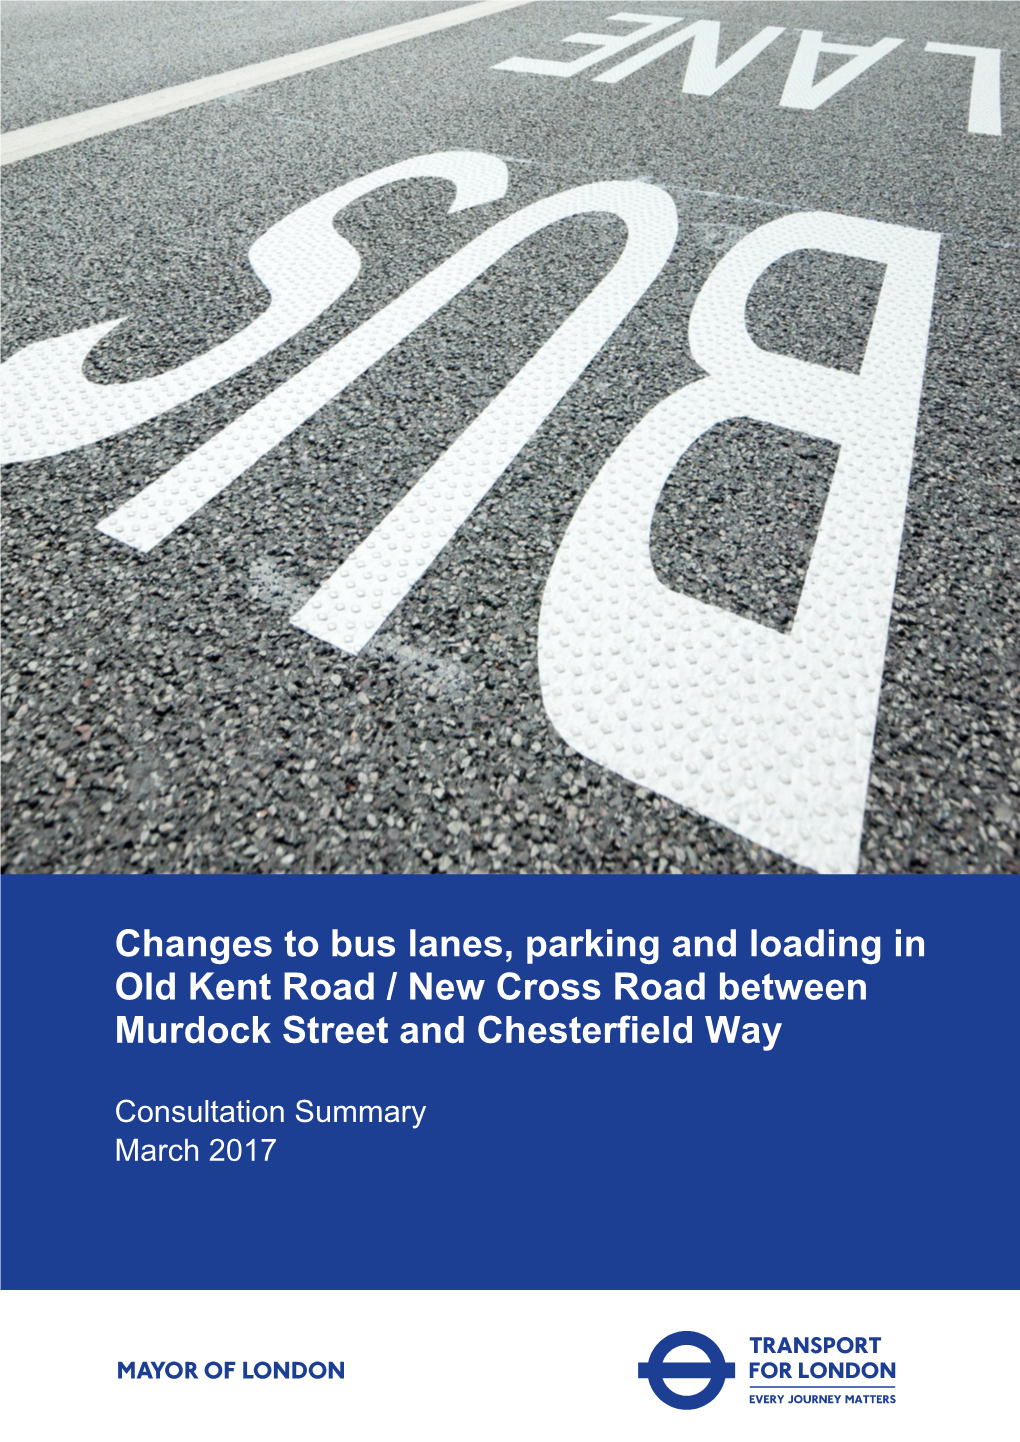 Changes to Bus Lanes, Parking and Loading in Old Kent Road /New